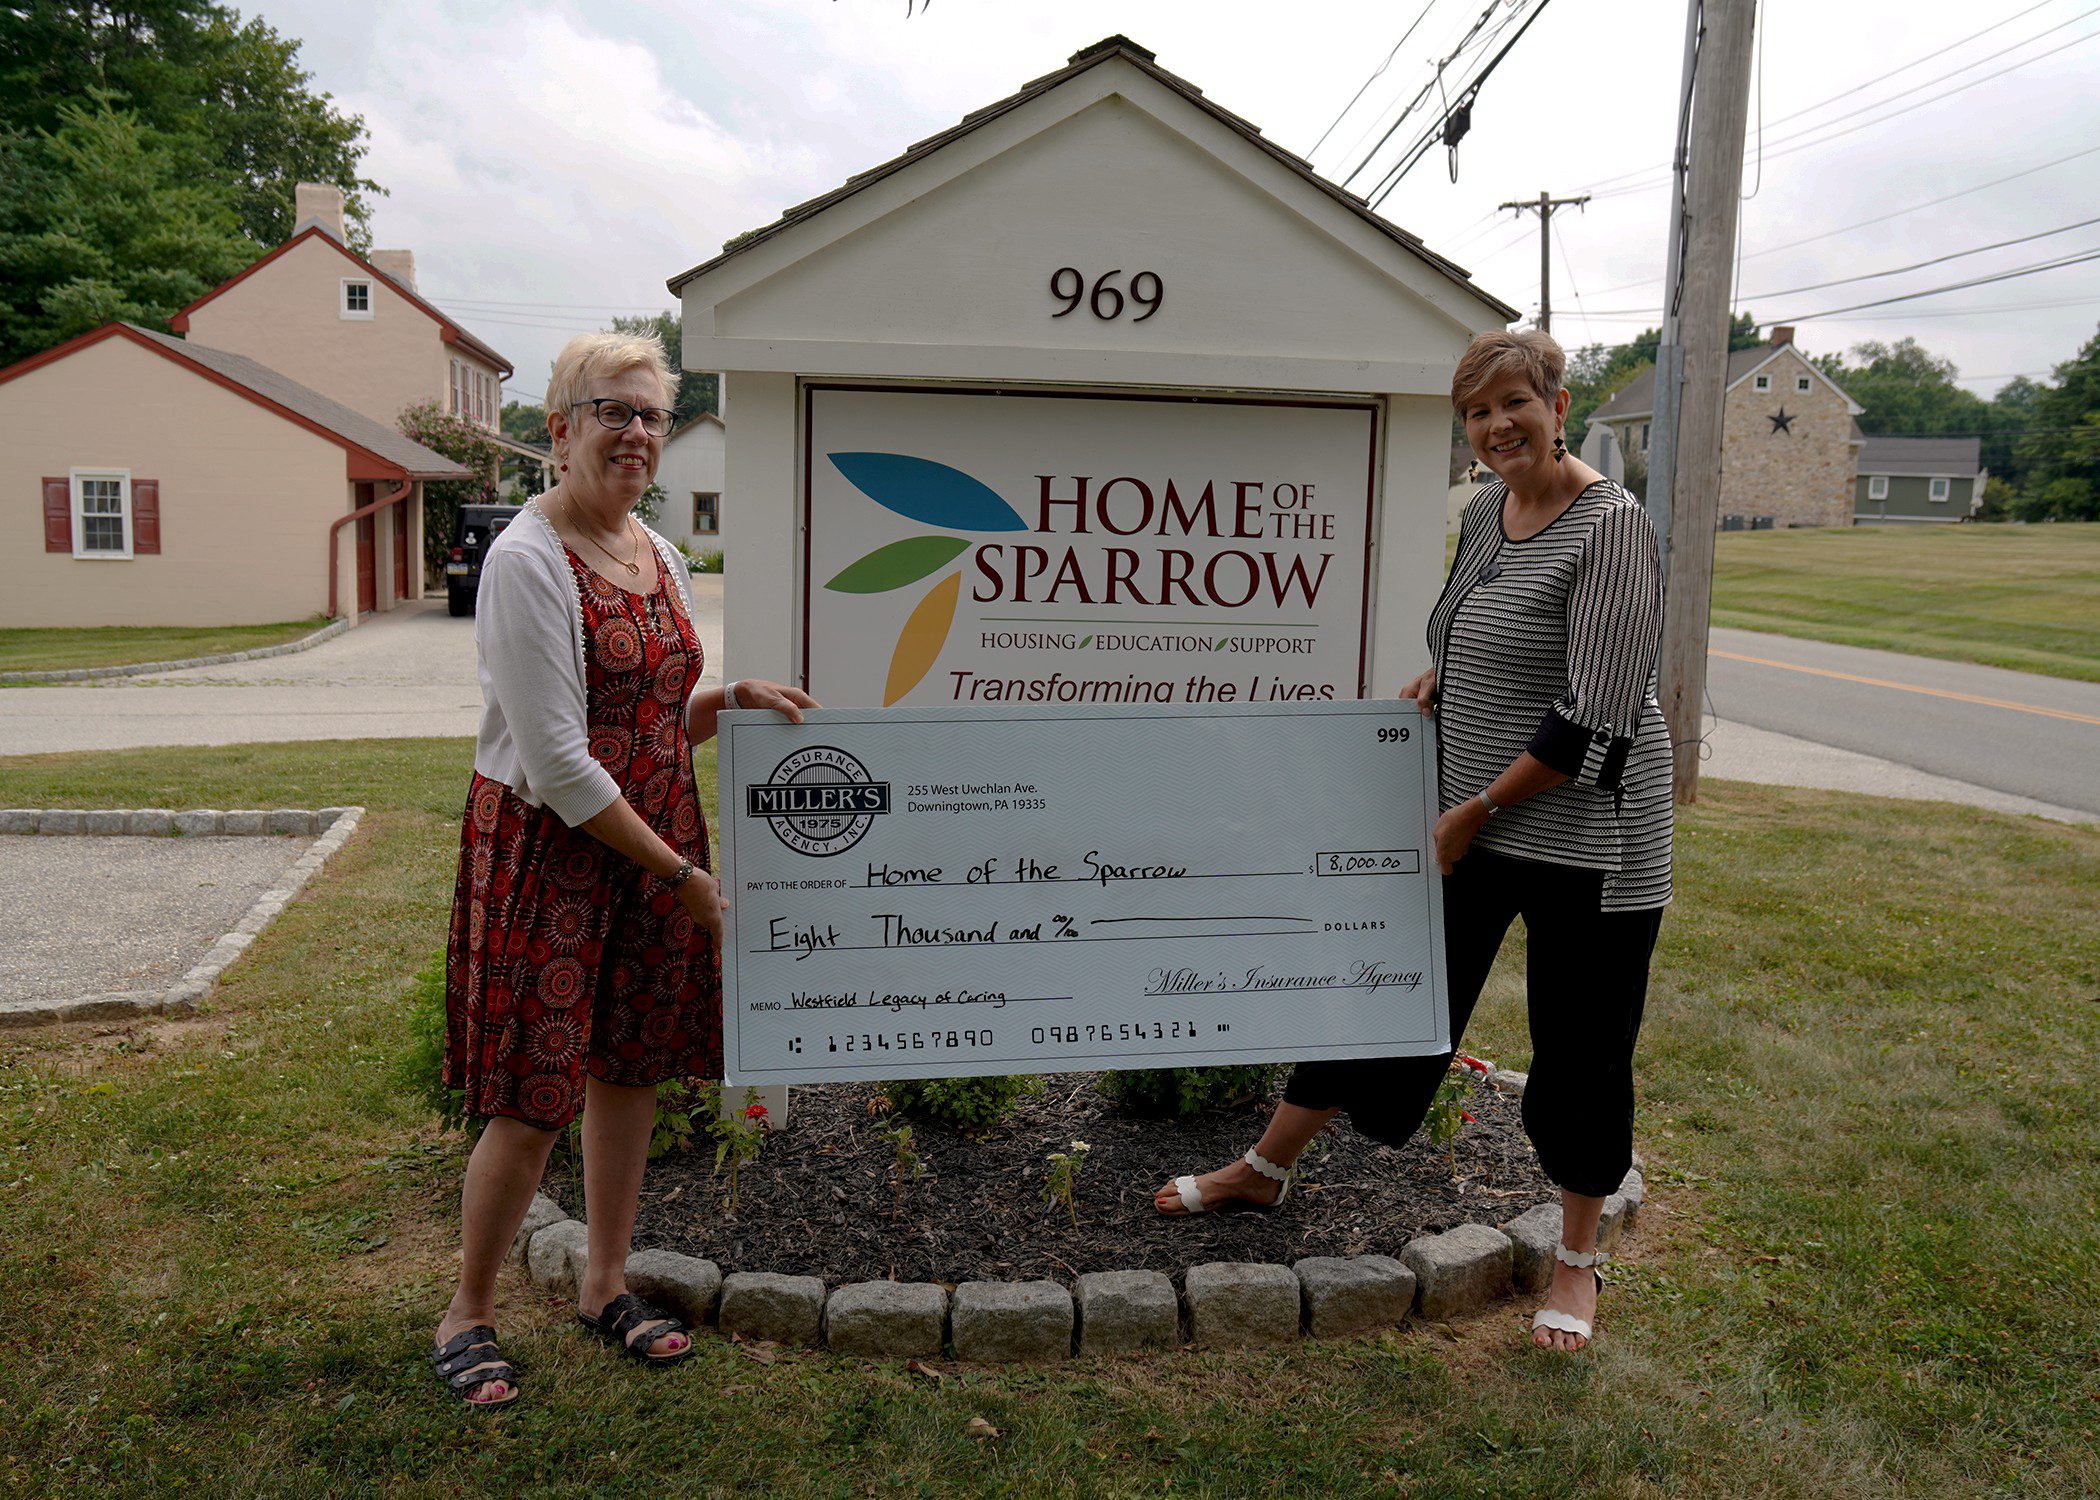 Westfield Legacy of Caring Home of the Sparrow Donation